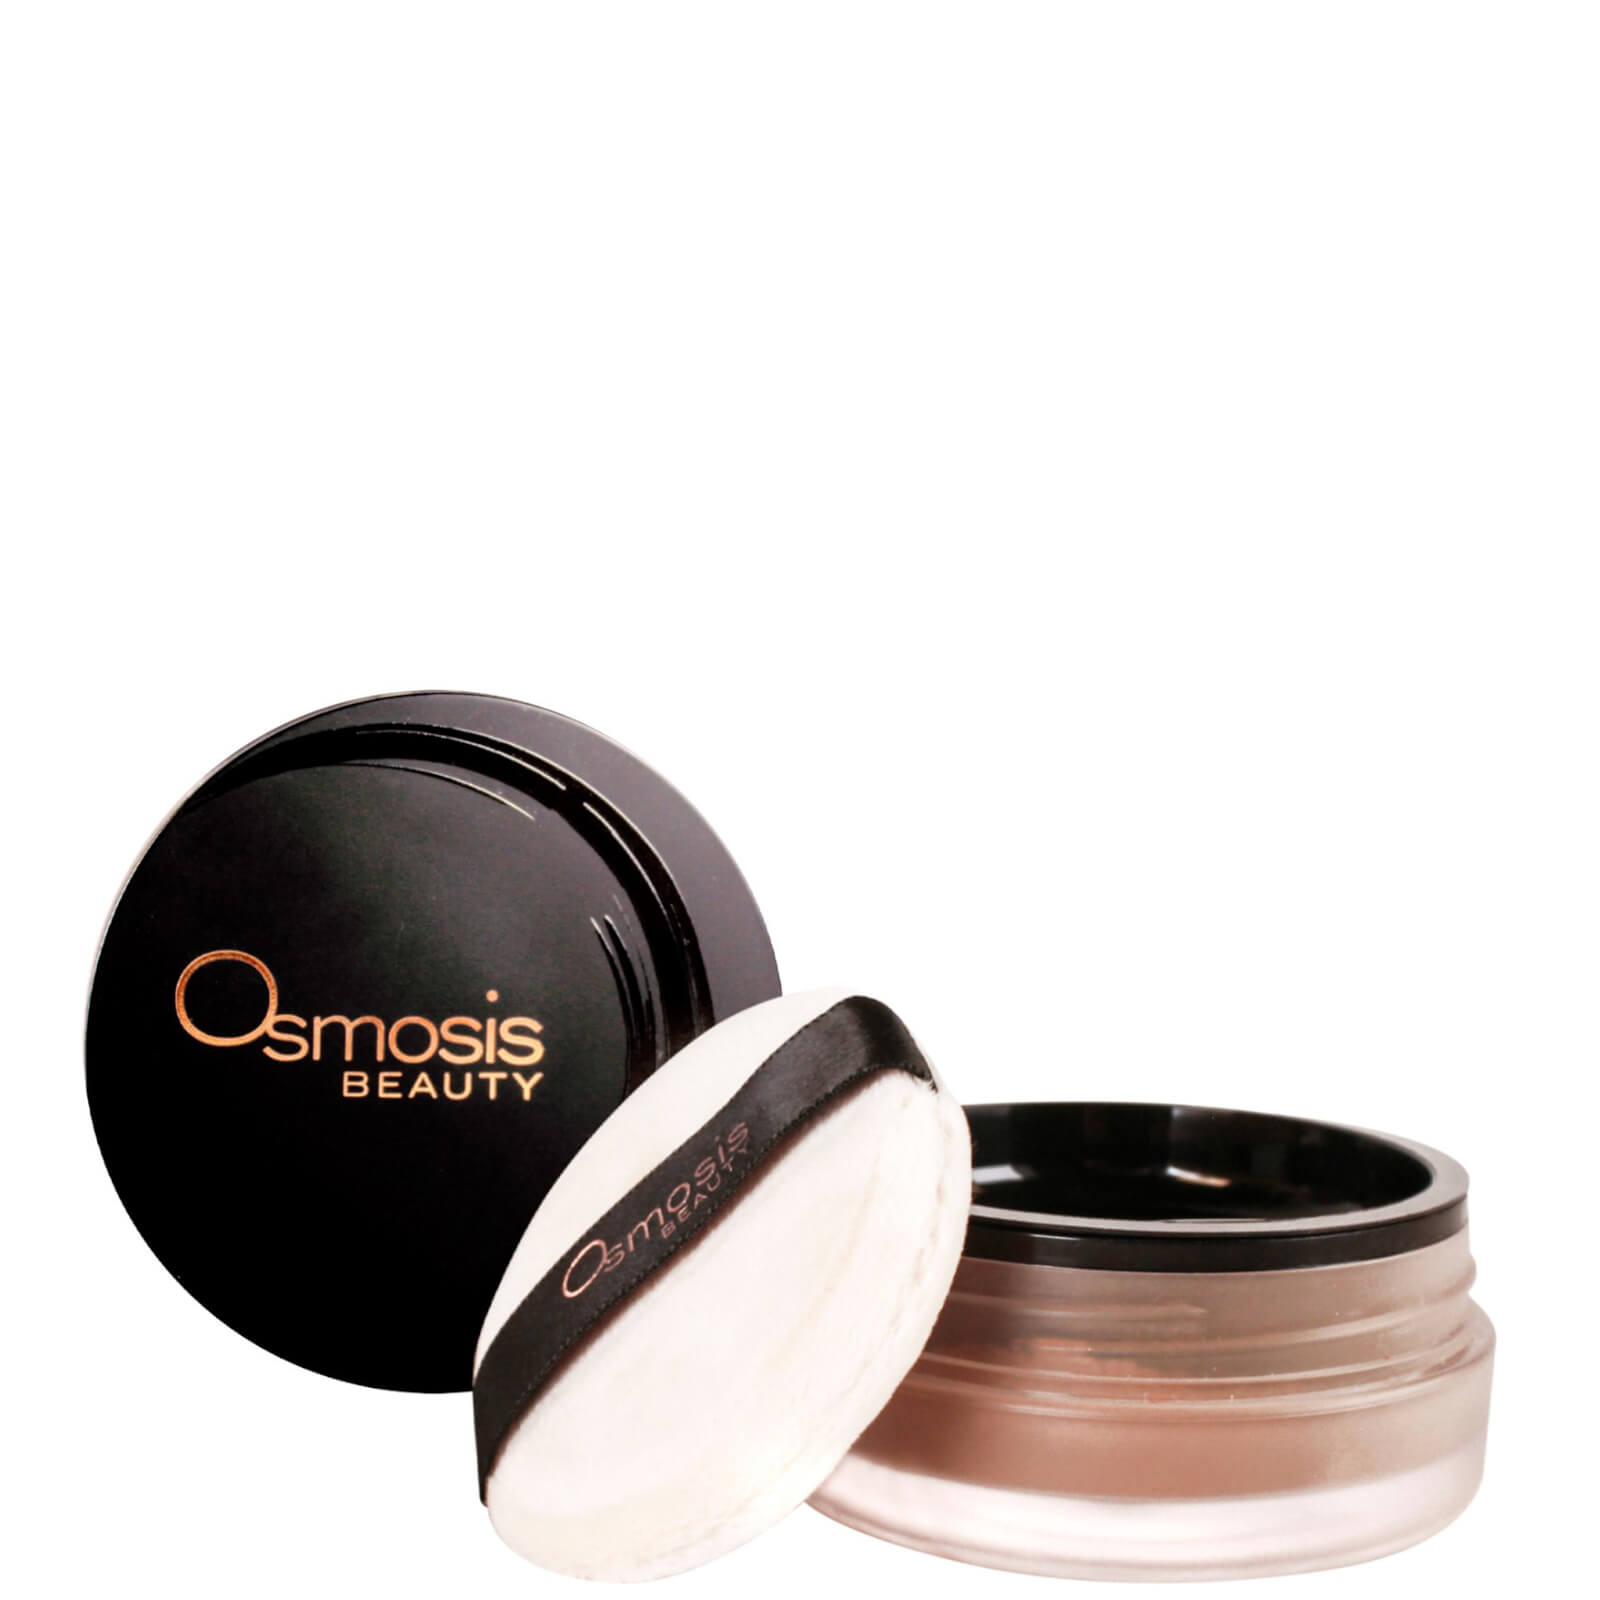 Osmosis Beauty Voila Finishing Loose Powder (various Shades) In White